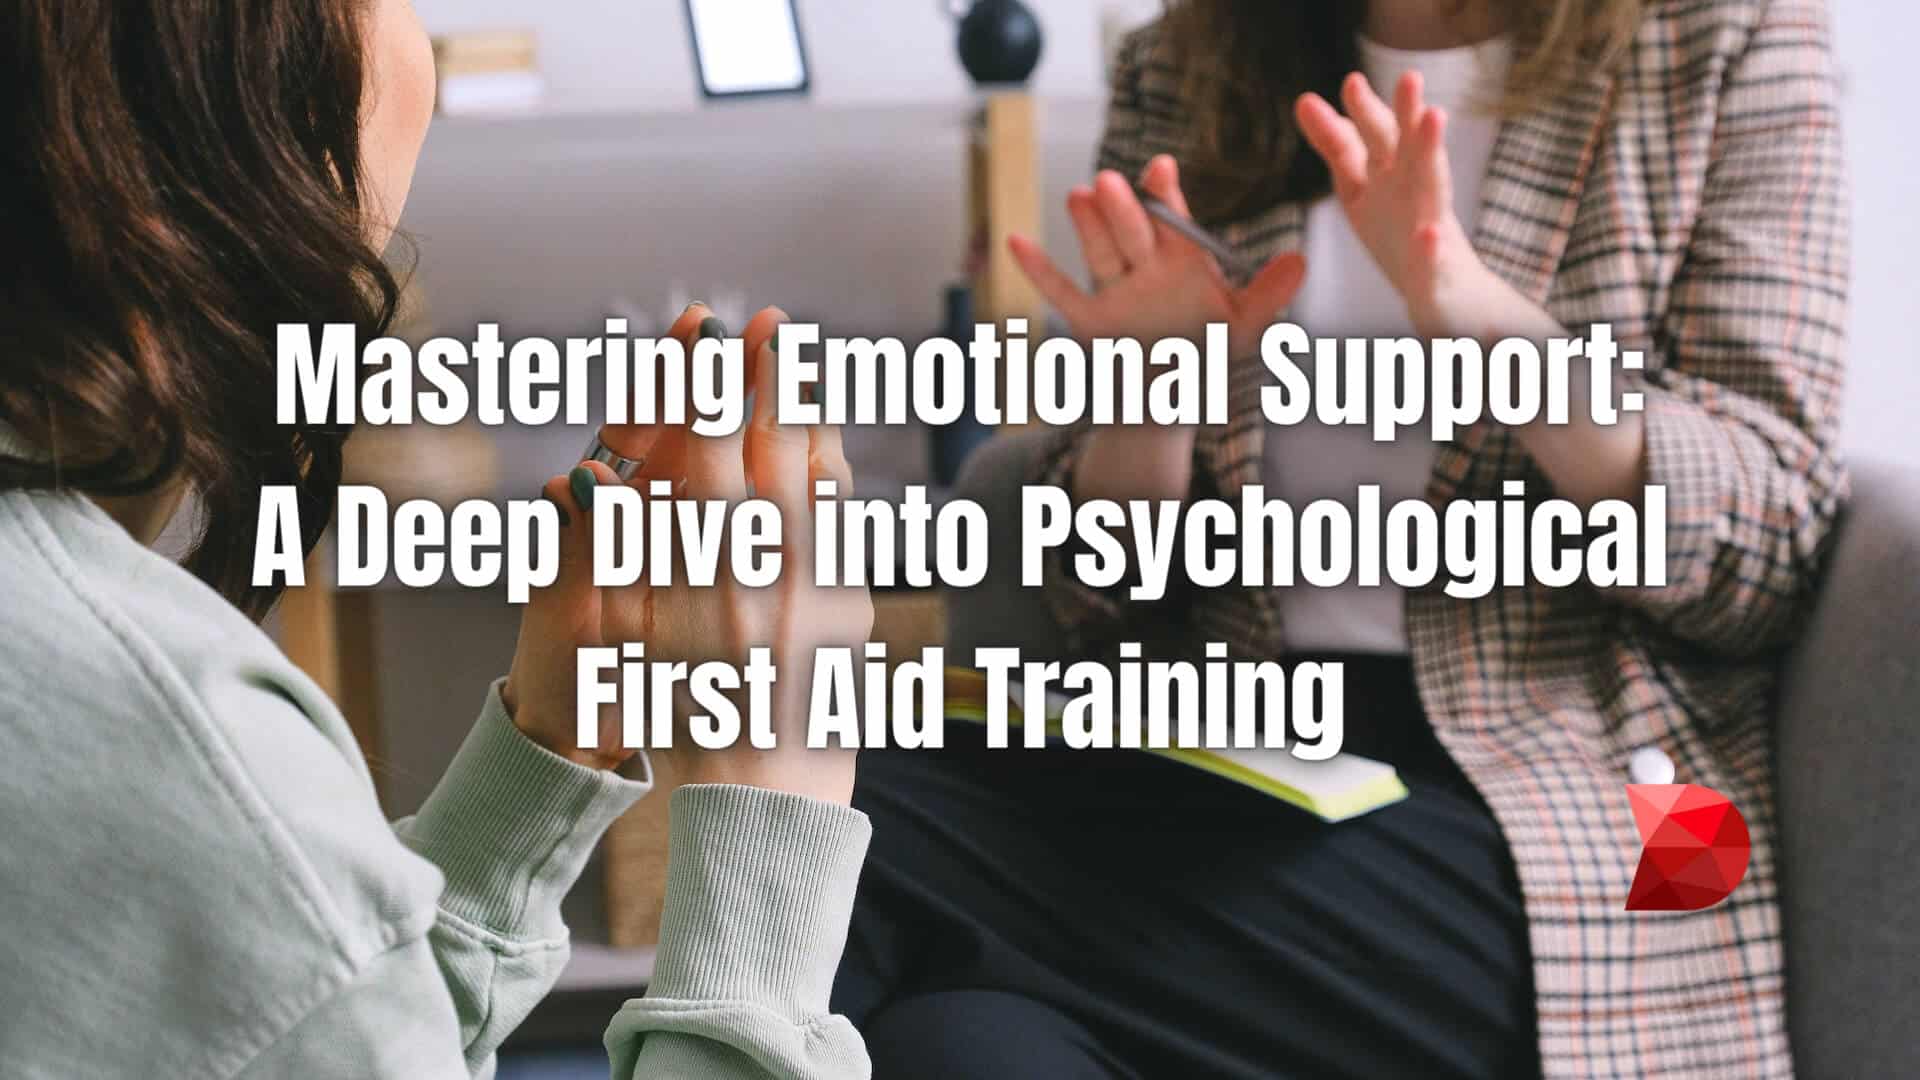 Master essential techniques with this guide to Psychological First Aid Training. Empower yourself to provide crucial support. Learn more!